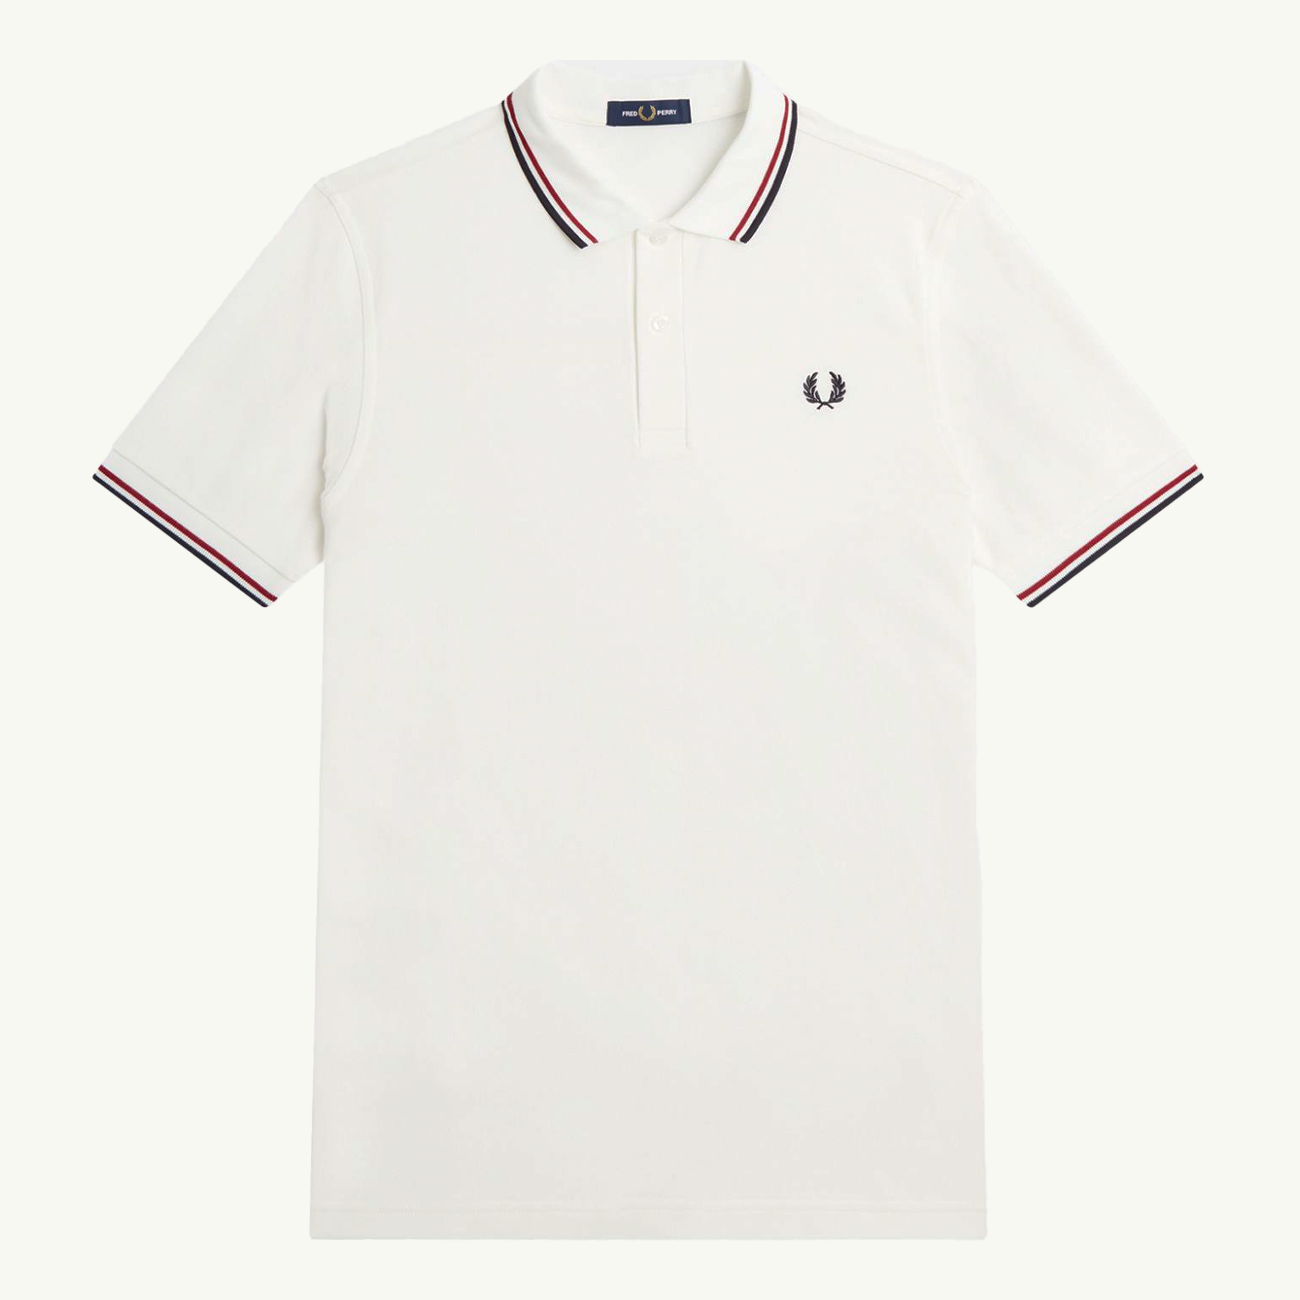 Twin Tipped Shirt - White/Red/Navy